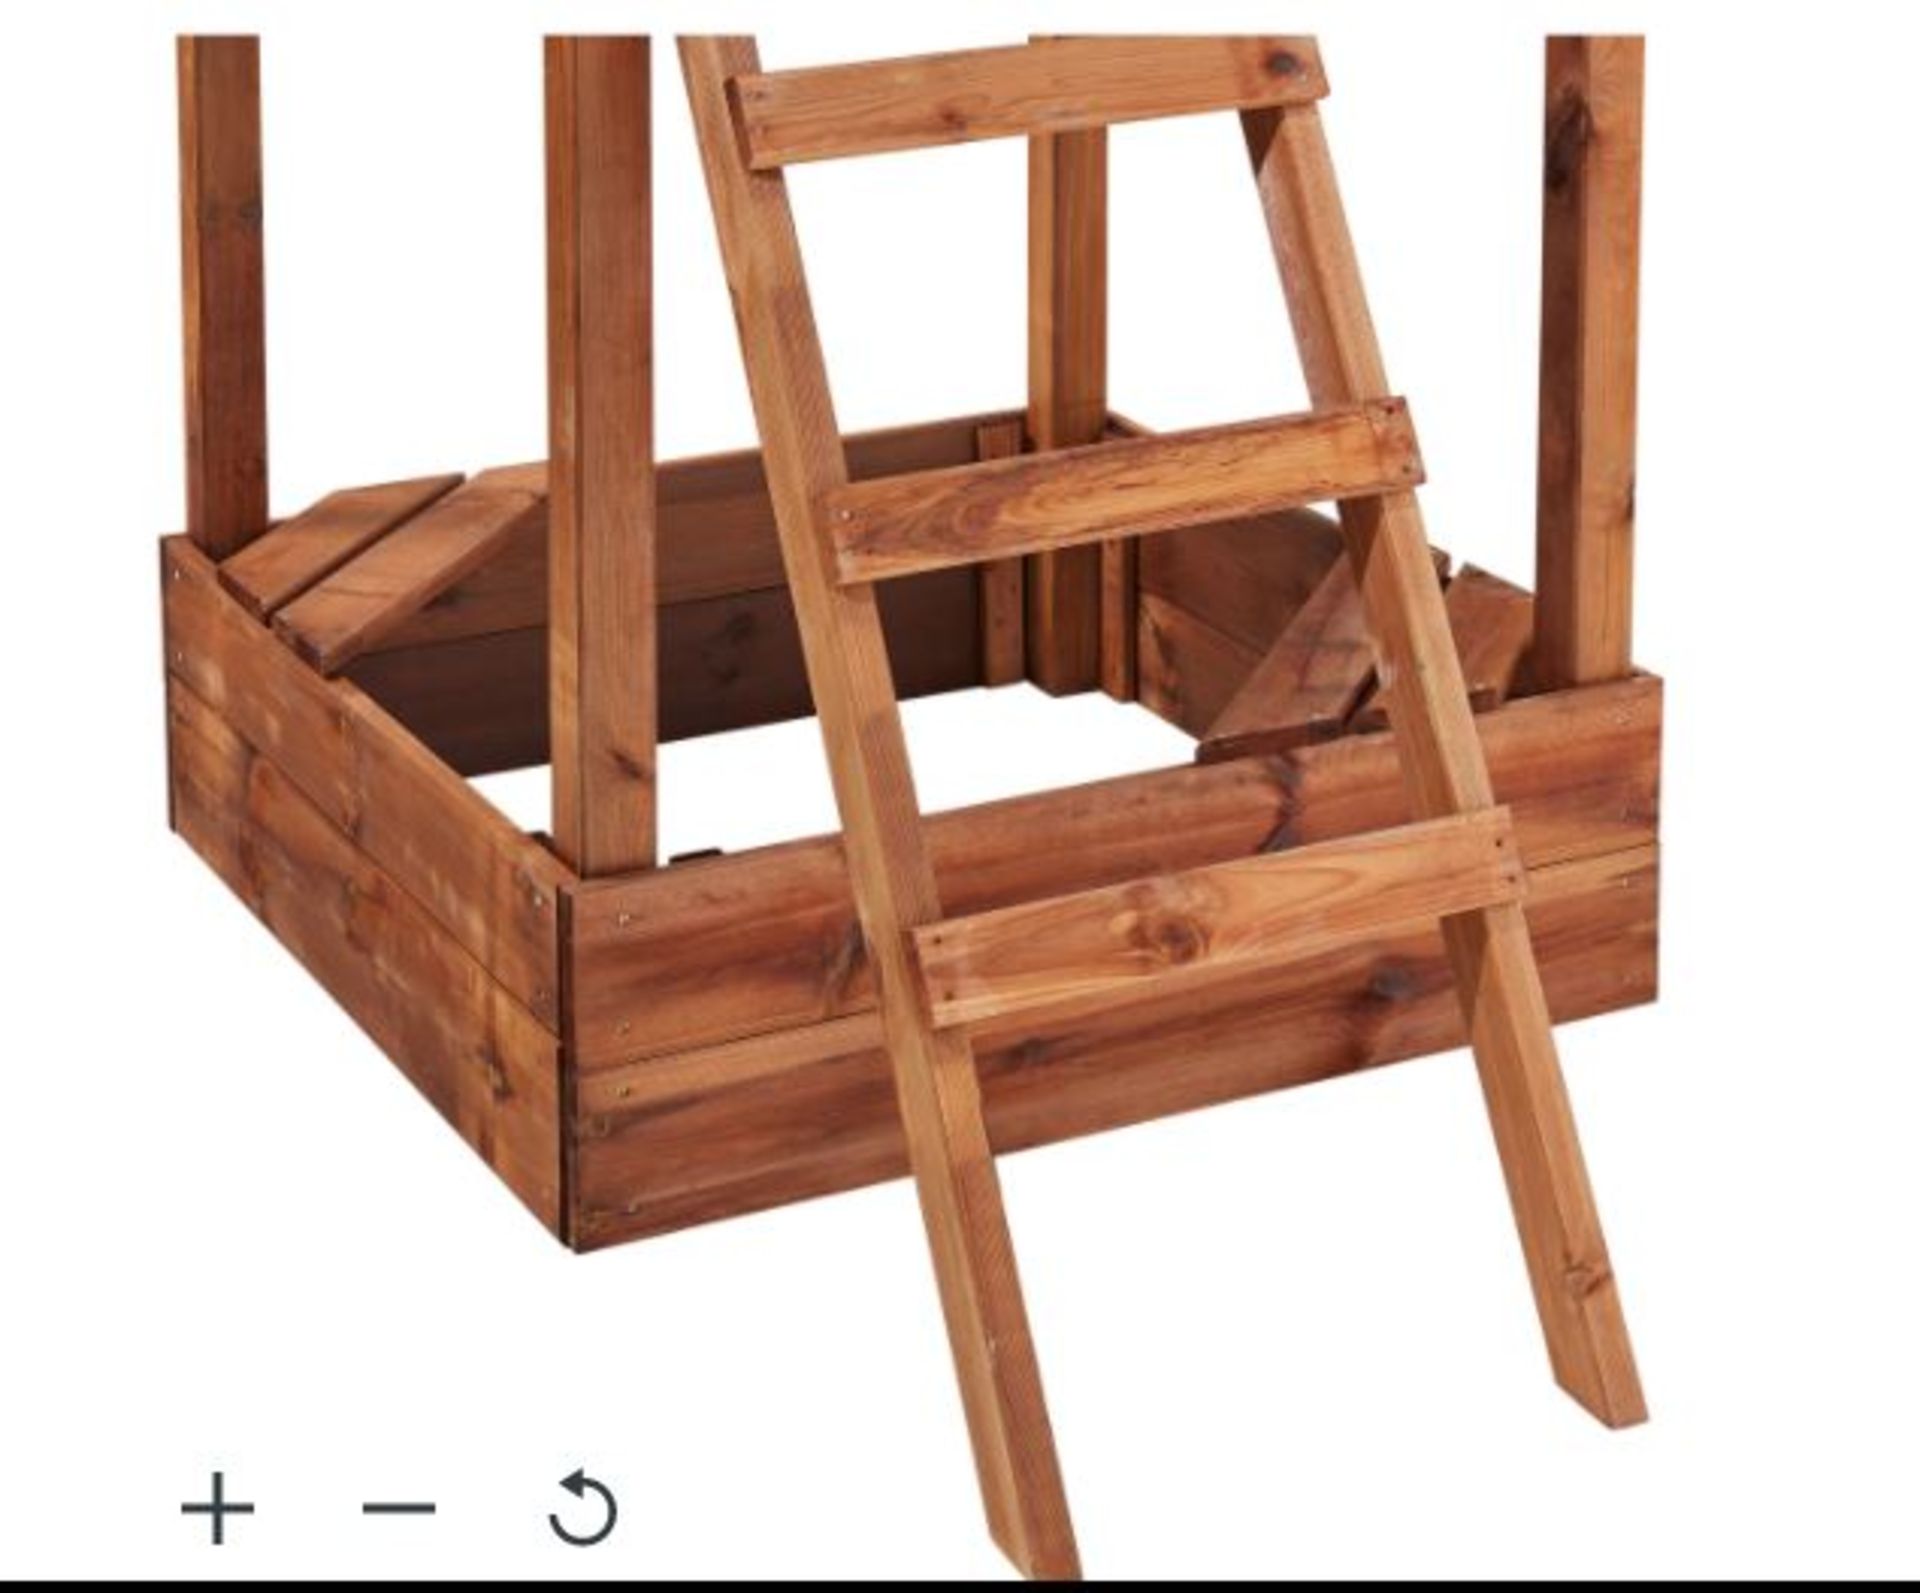 New Janer Wooden Swing Set. This Janek swing set comes with swing seats, swing hooks, tower, roof - Image 2 of 2